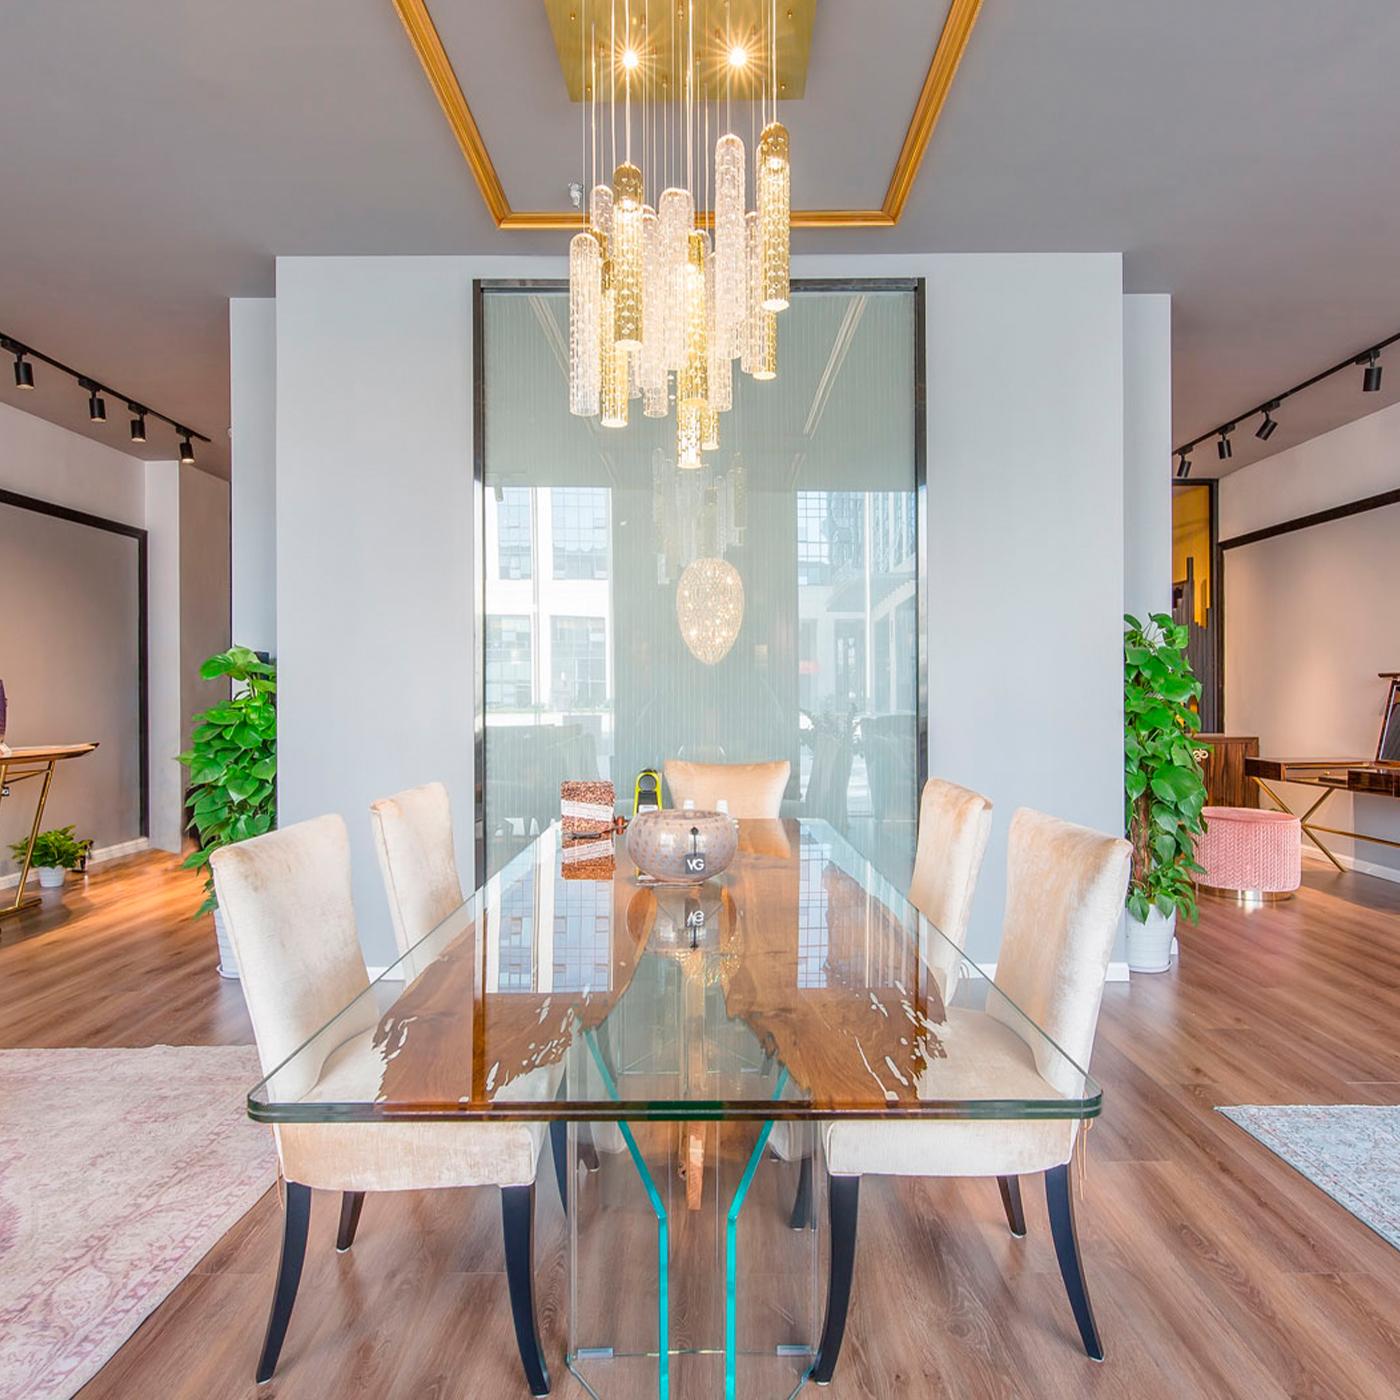 Gold and glass come together in this glamorous pendant lamp composed of alternating clear and 24k gold-finished Murano glass pipes suspended at different heights from the square flush-mounted ceiling plate in coordinating gold finish. The light